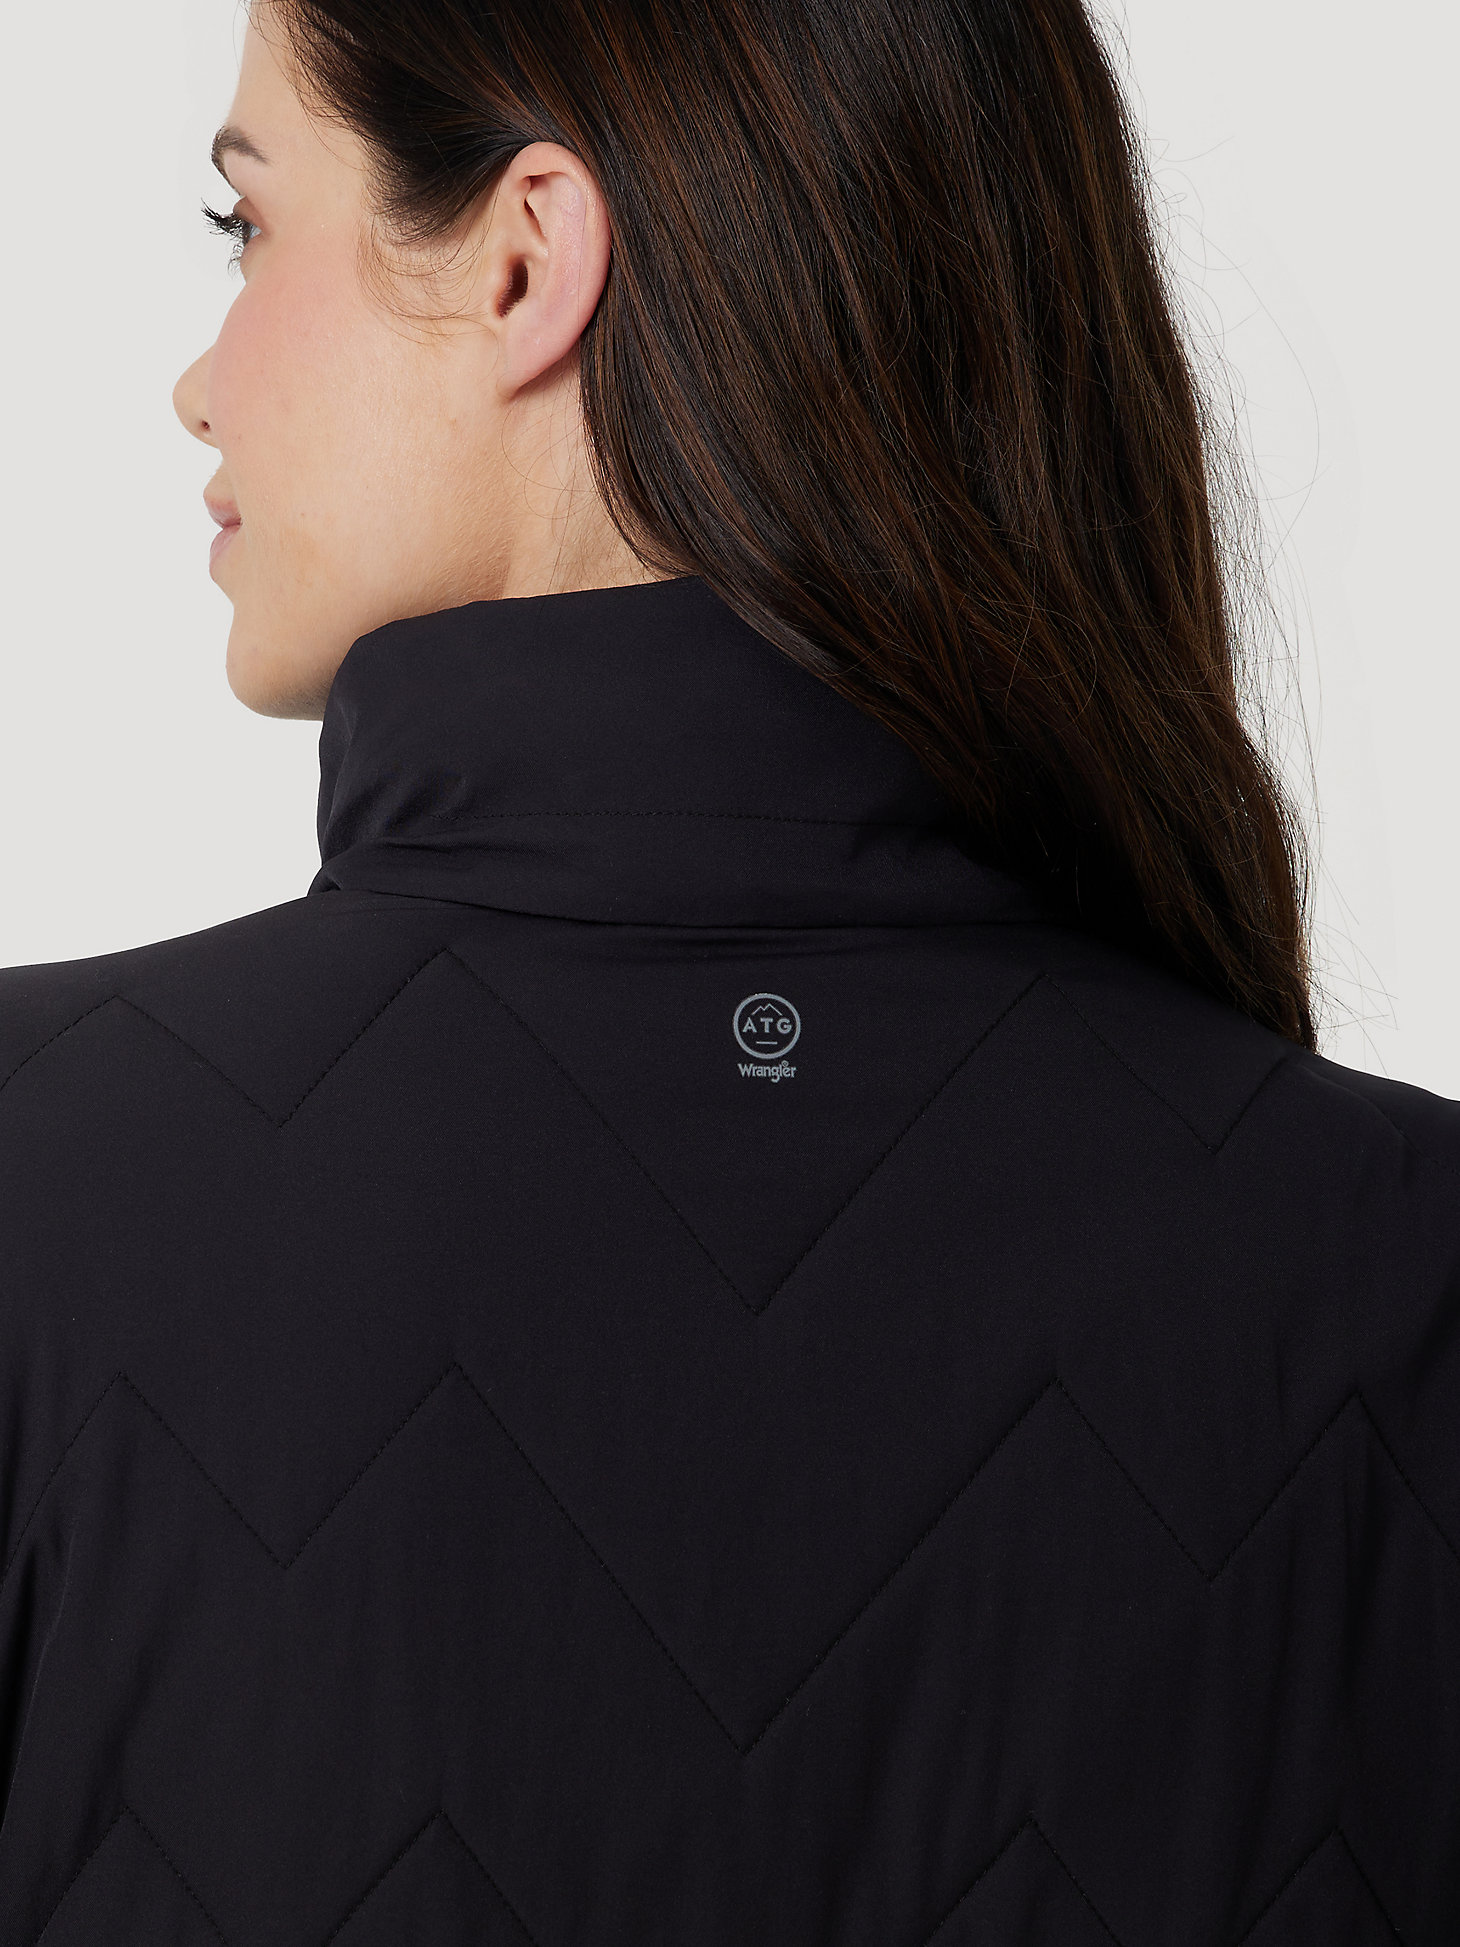 ATG Womens Packable Quilted Jacket:Jet Black:XXL alternative view 8